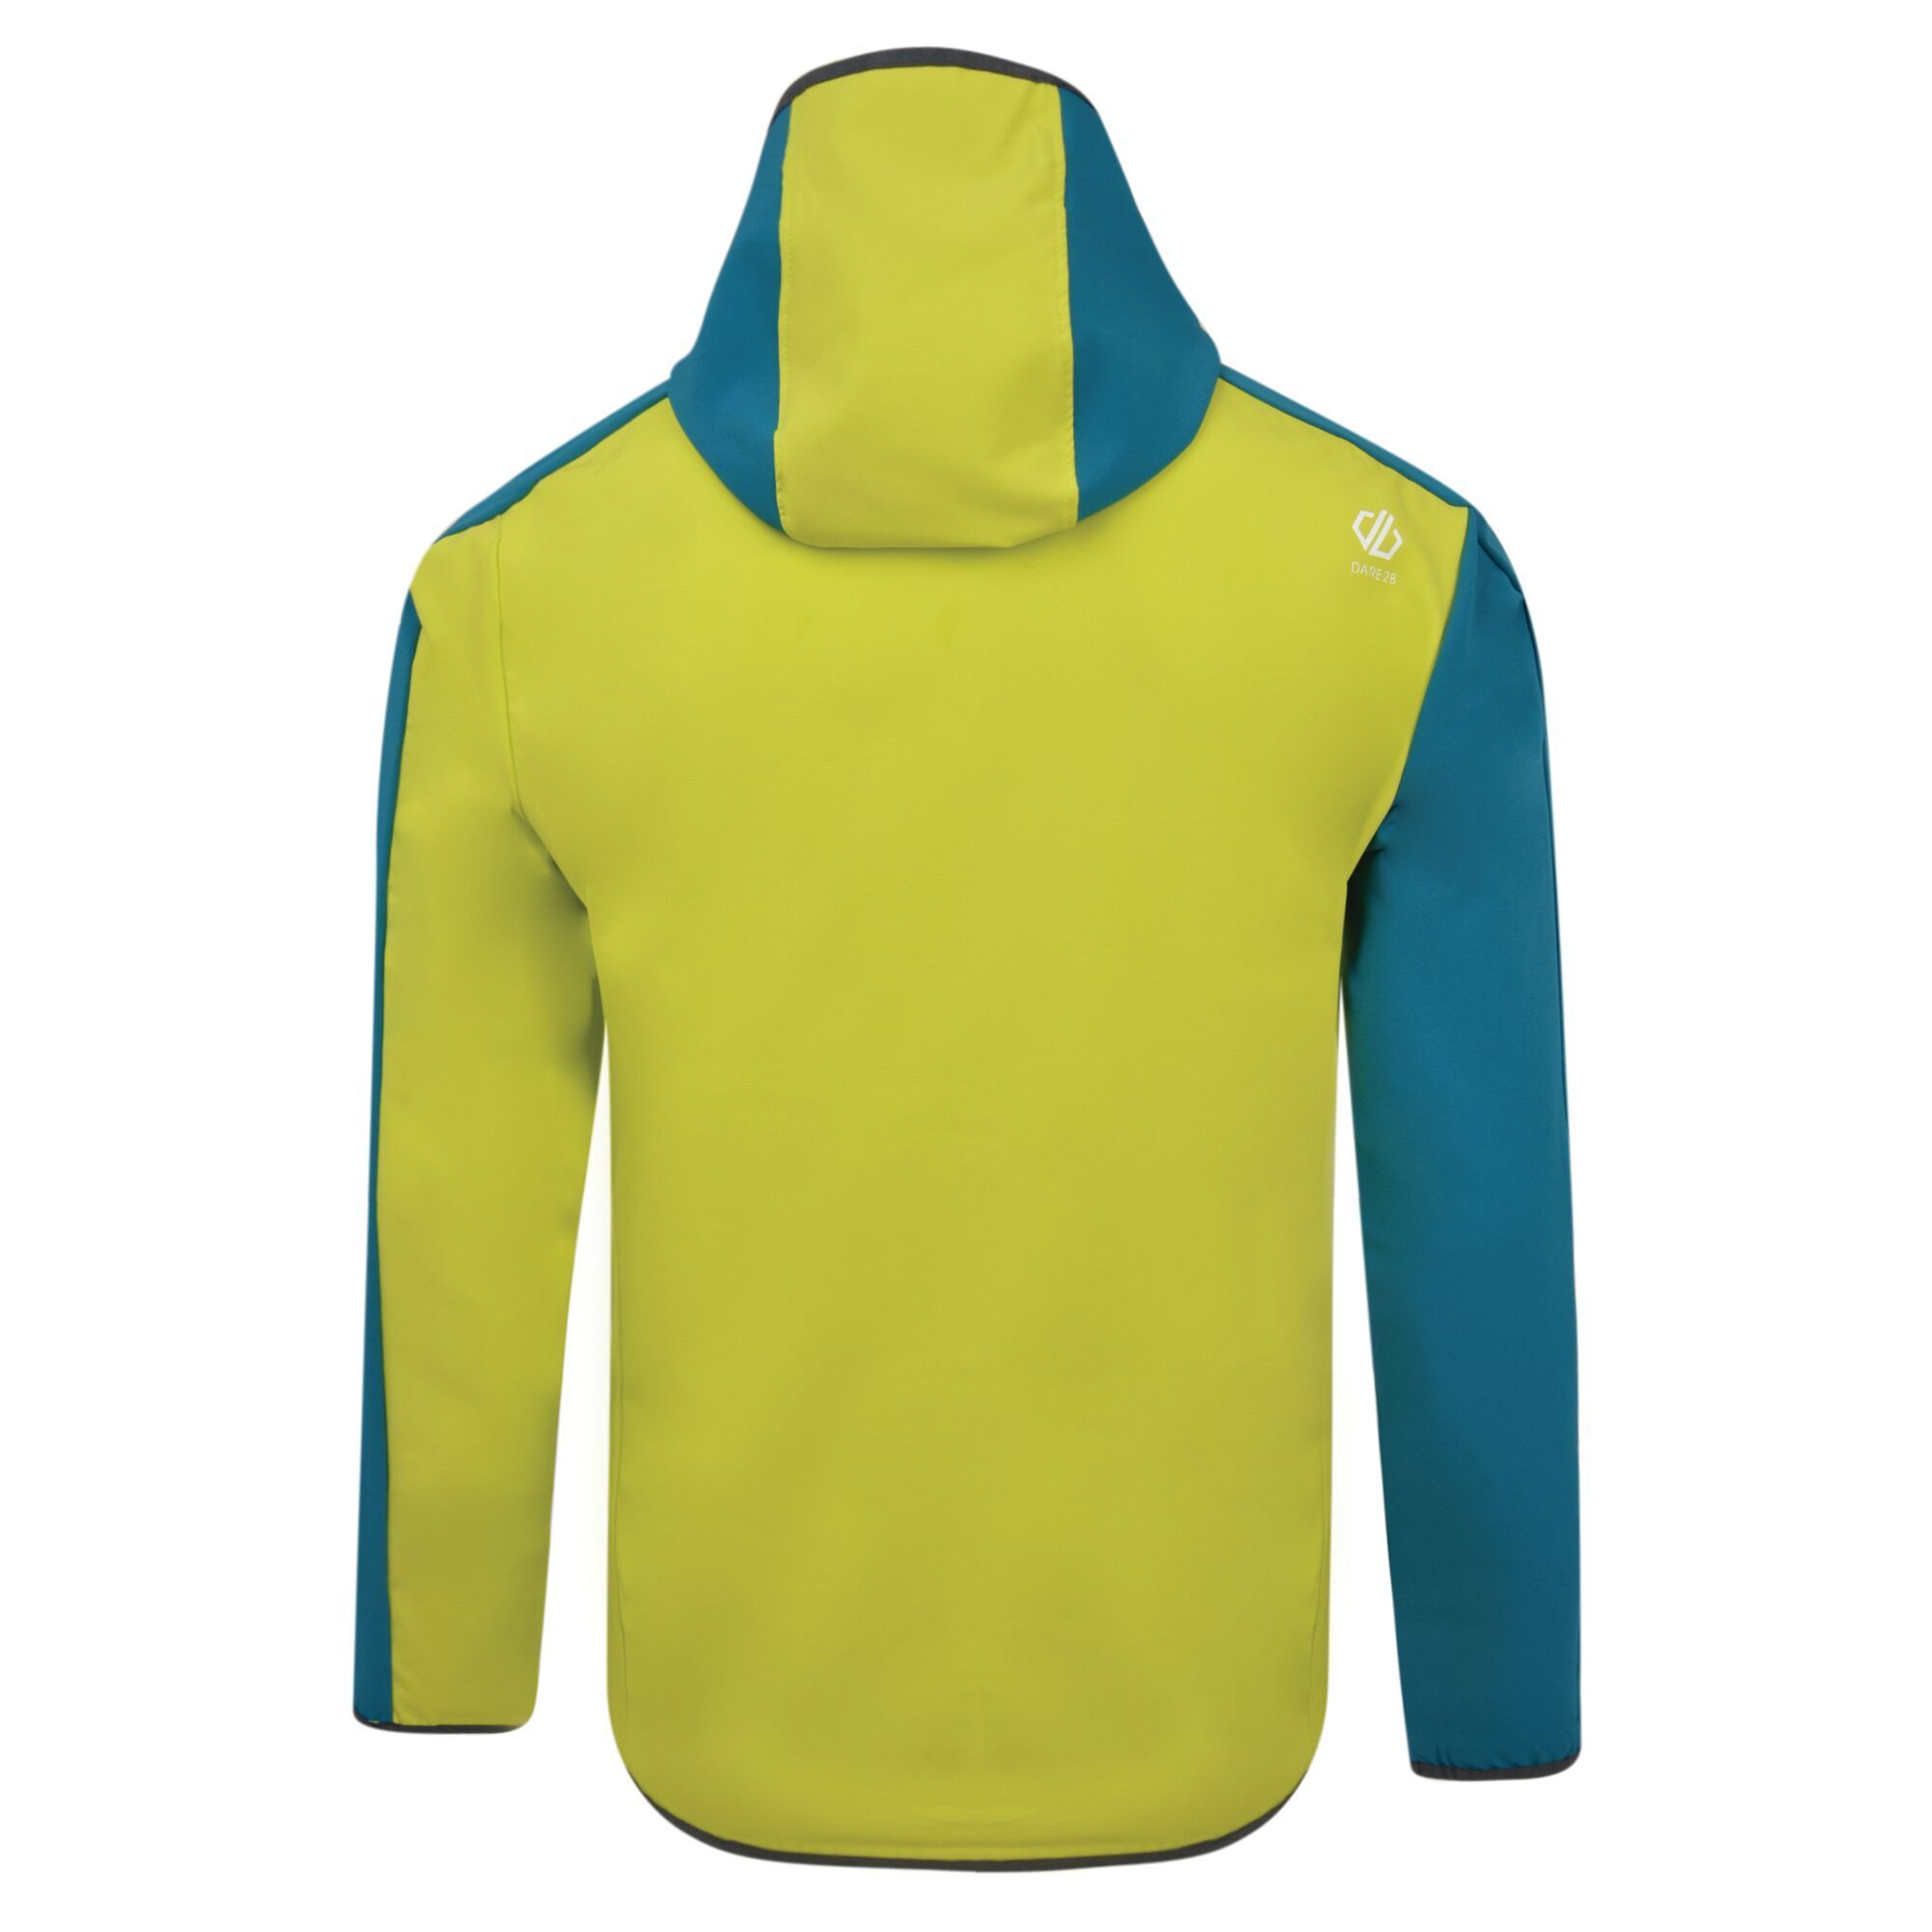 7% elastane, 3% cotton and 90% polyester. Ilus softshell with woven stretch polyester and textured panels. Water repellent finish. Grown on hood with elastication. Stretch binding to cuffs and hem. 2 x zipped lower pockets.